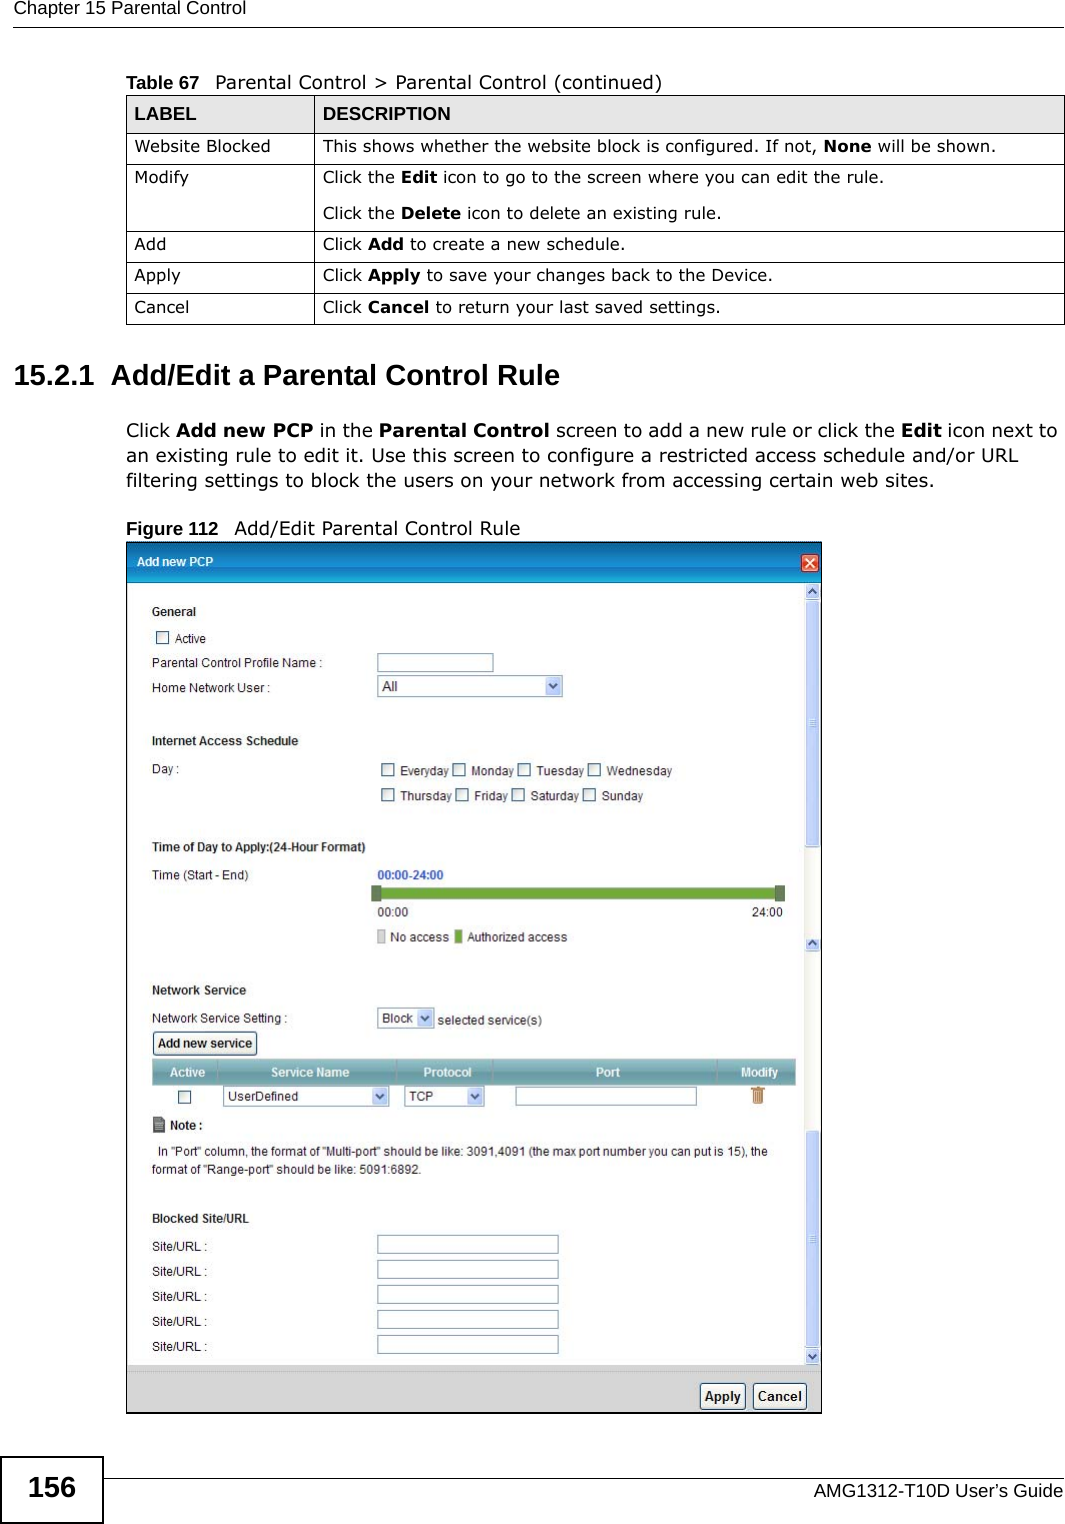 Chapter 15 Parental ControlAMG1312-T10D User’s Guide15615.2.1  Add/Edit a Parental Control RuleClick Add new PCP in the Parental Control screen to add a new rule or click the Edit icon next to an existing rule to edit it. Use this screen to configure a restricted access schedule and/or URL filtering settings to block the users on your network from accessing certain web sites.Figure 112   Add/Edit Parental Control Rule Website Blocked This shows whether the website block is configured. If not, None will be shown.Modify Click the Edit icon to go to the screen where you can edit the rule.Click the Delete icon to delete an existing rule.Add Click Add to create a new schedule.Apply Click Apply to save your changes back to the Device.Cancel Click Cancel to return your last saved settings.Table 67   Parental Control &gt; Parental Control (continued)LABEL DESCRIPTION